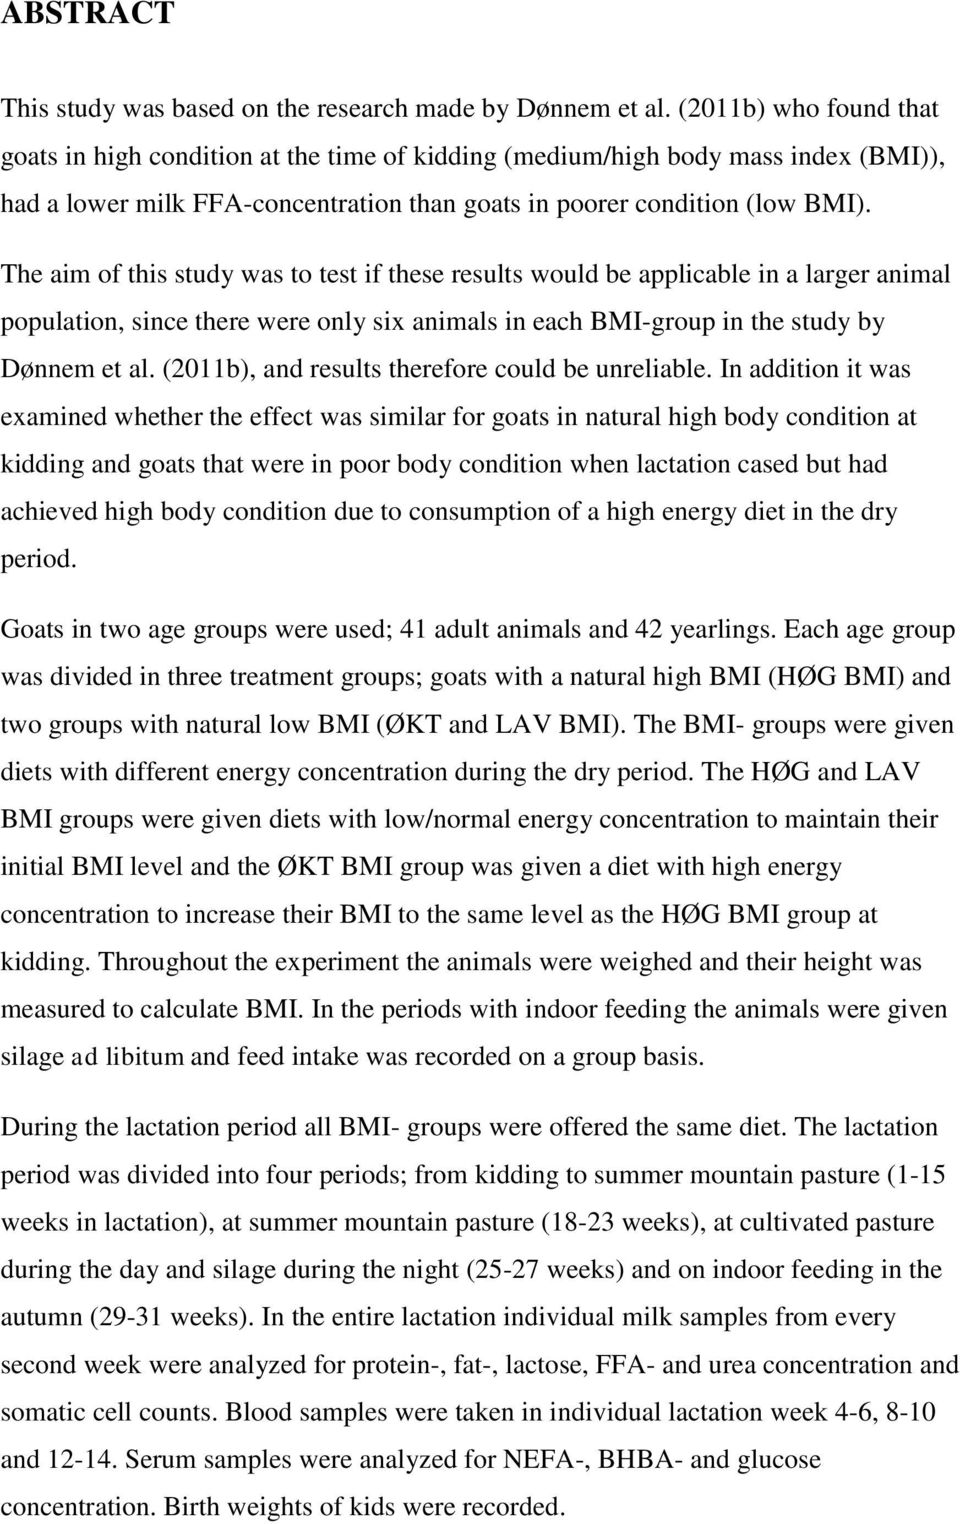 The aim of this study was to test if these results would be applicable in a larger animal population, since there were only six animals in each BMI-group in the study by Dønnem et al.